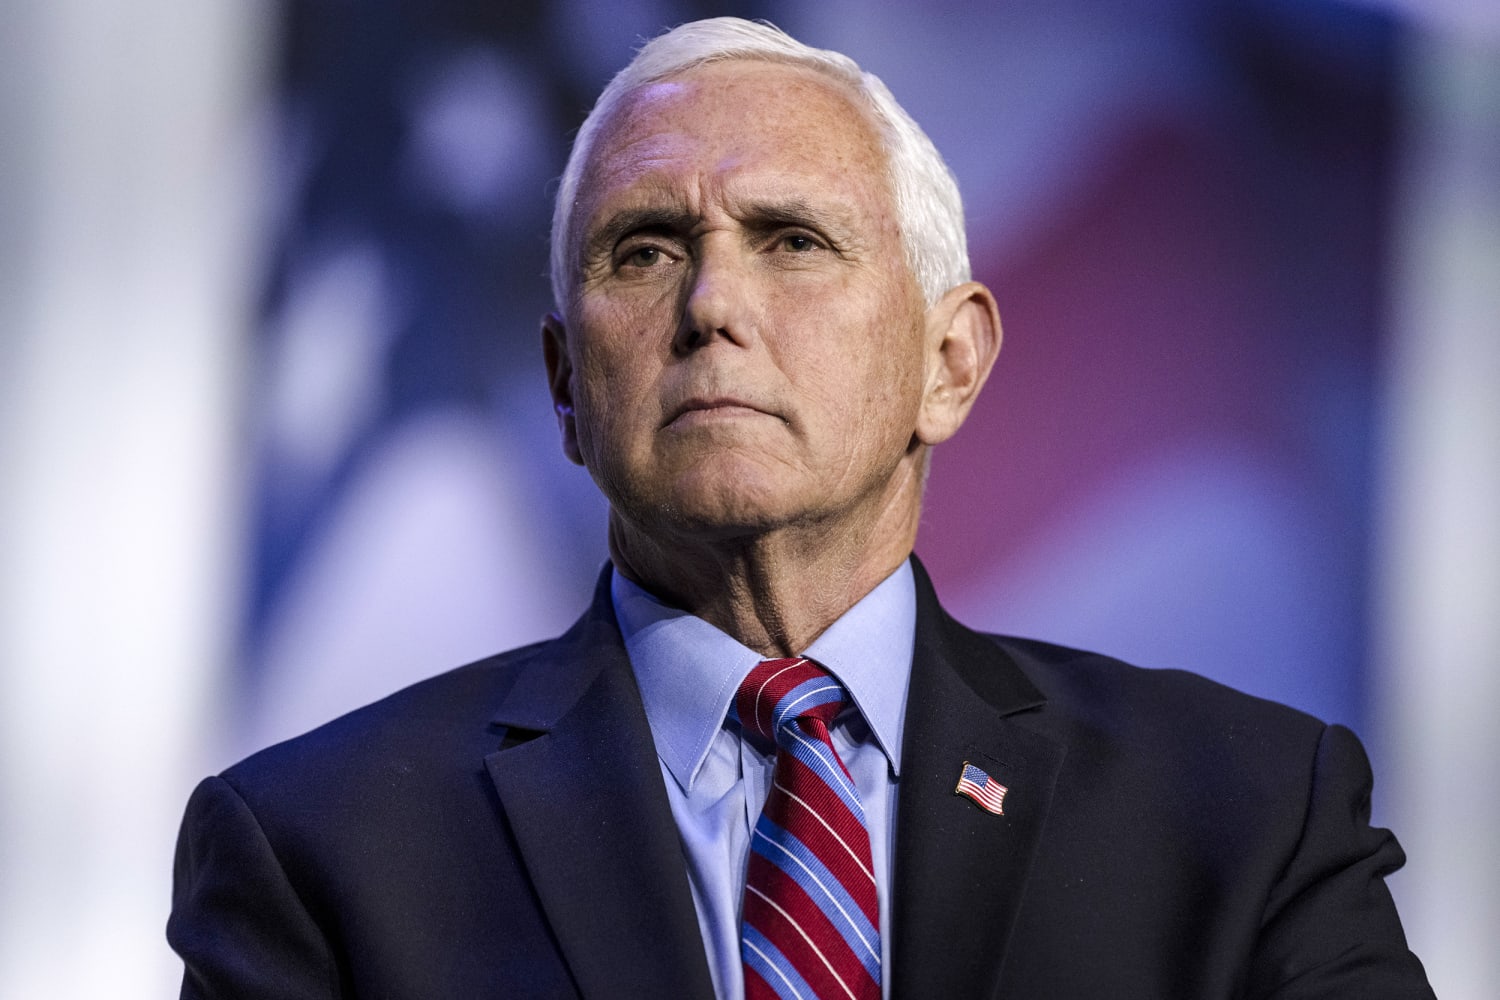 Trump clouds Pence’s effort to lay groundwork for 2024 presidential bid